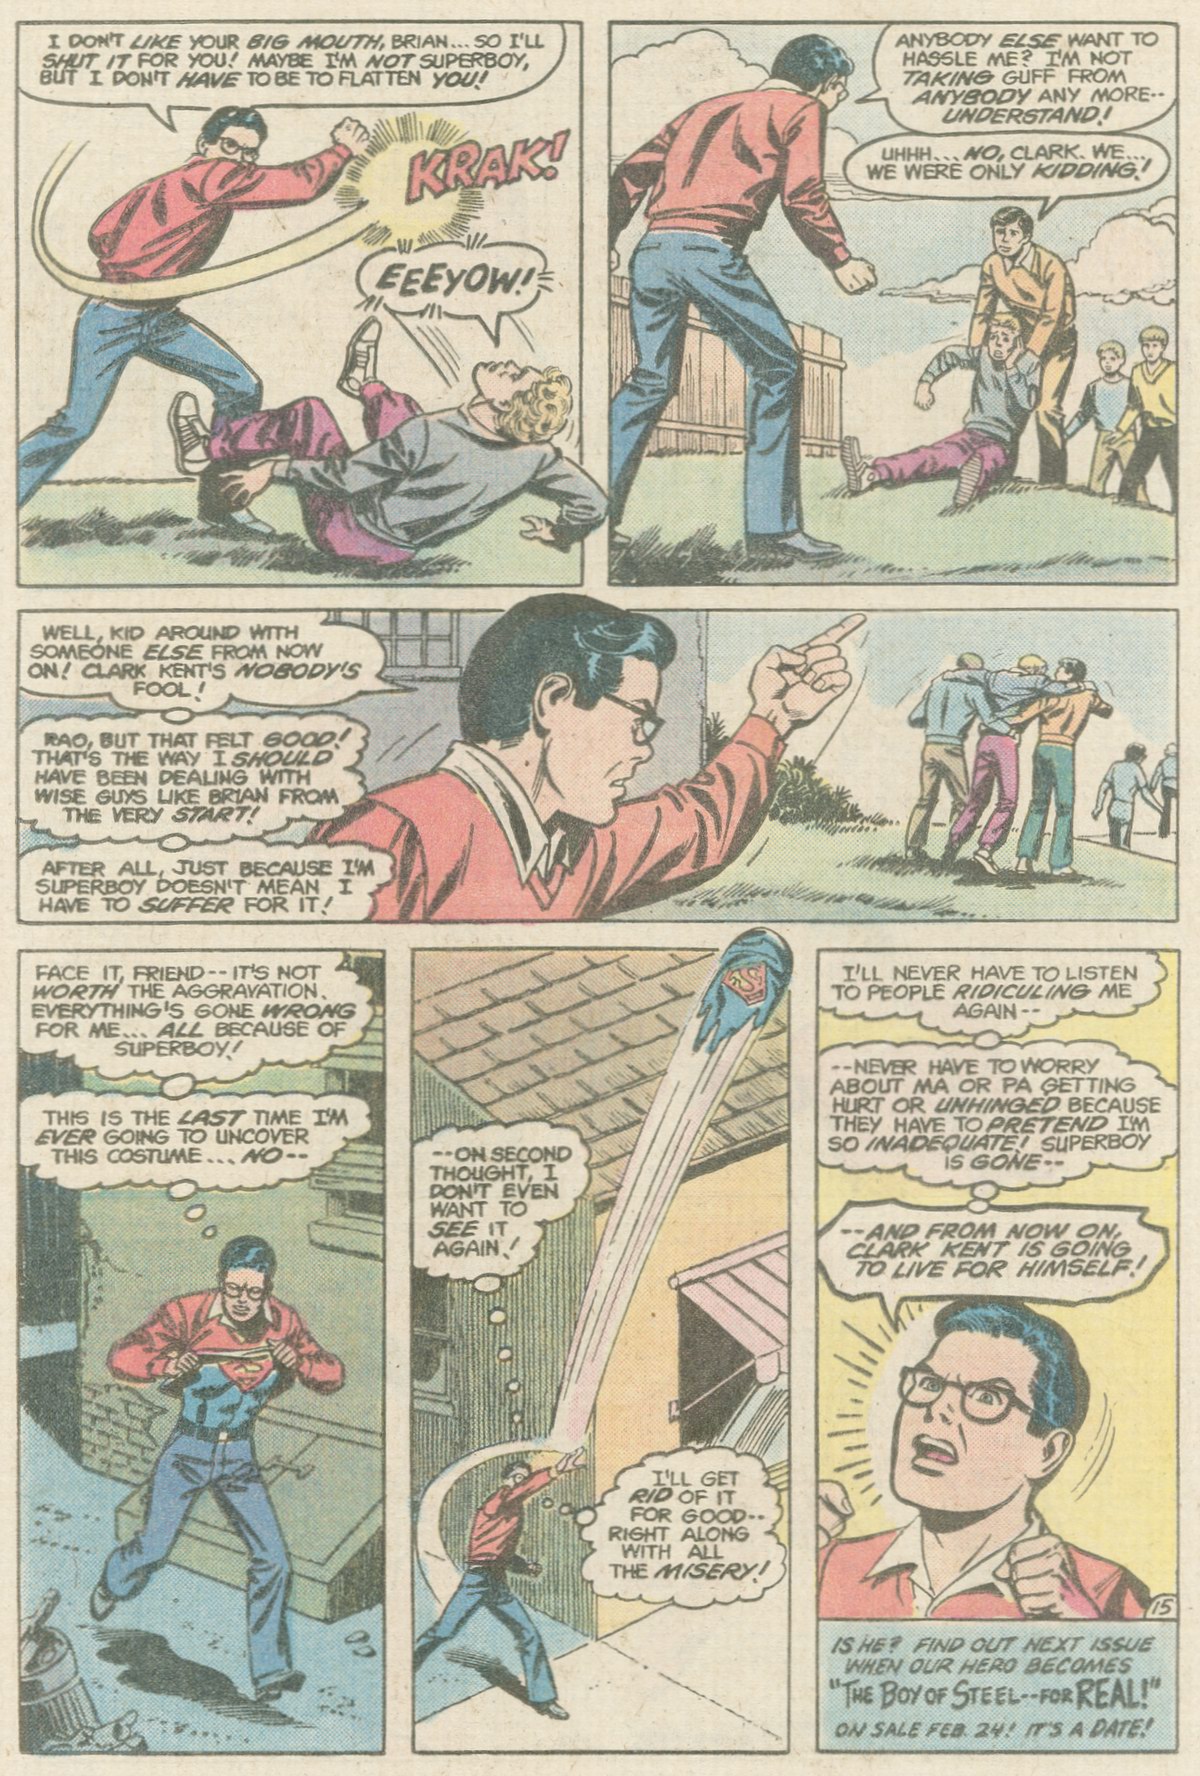 The New Adventures of Superboy 40 Page 15